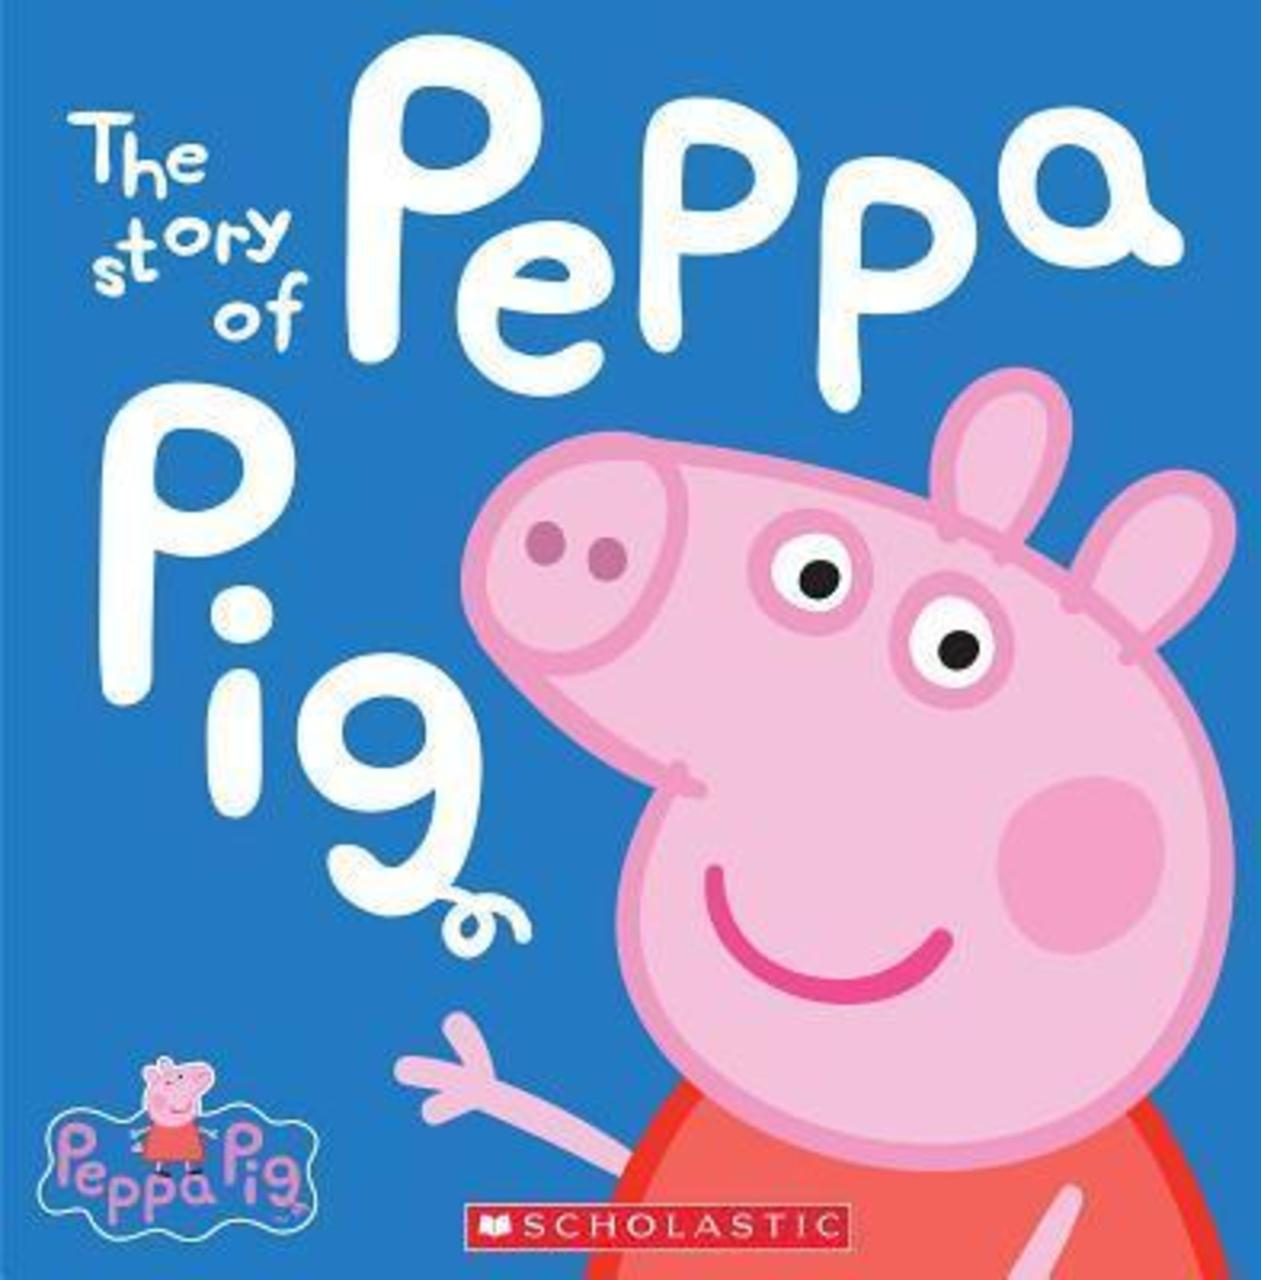 Sách - The Story of Peppa Pig (Peppa Pig) by Scholastic (hardcover)